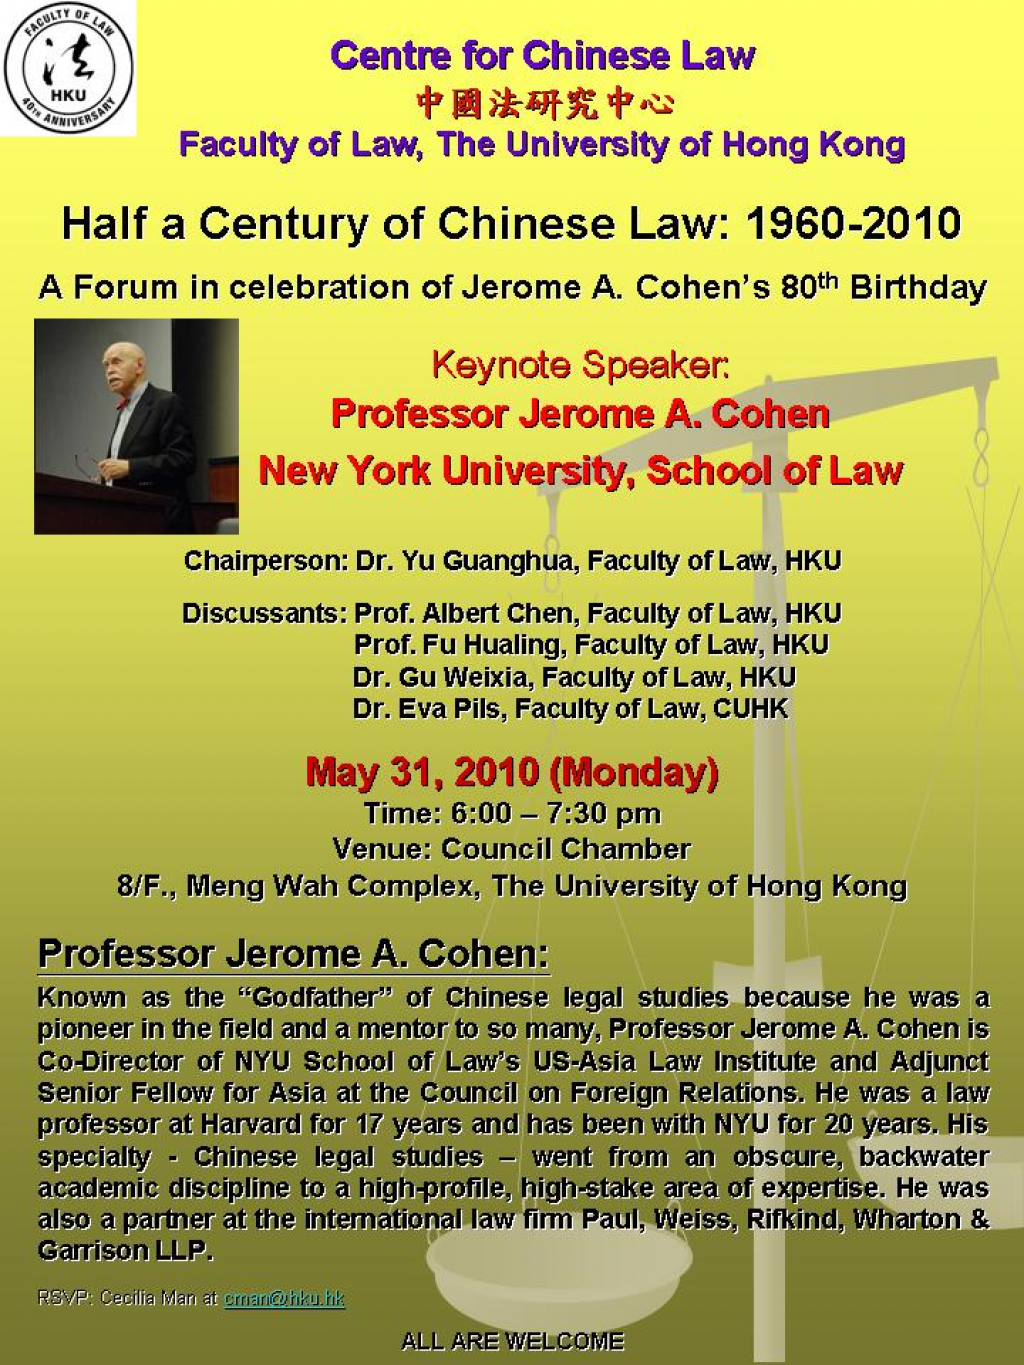 Half a Century of Chinese Law: 1960-2010